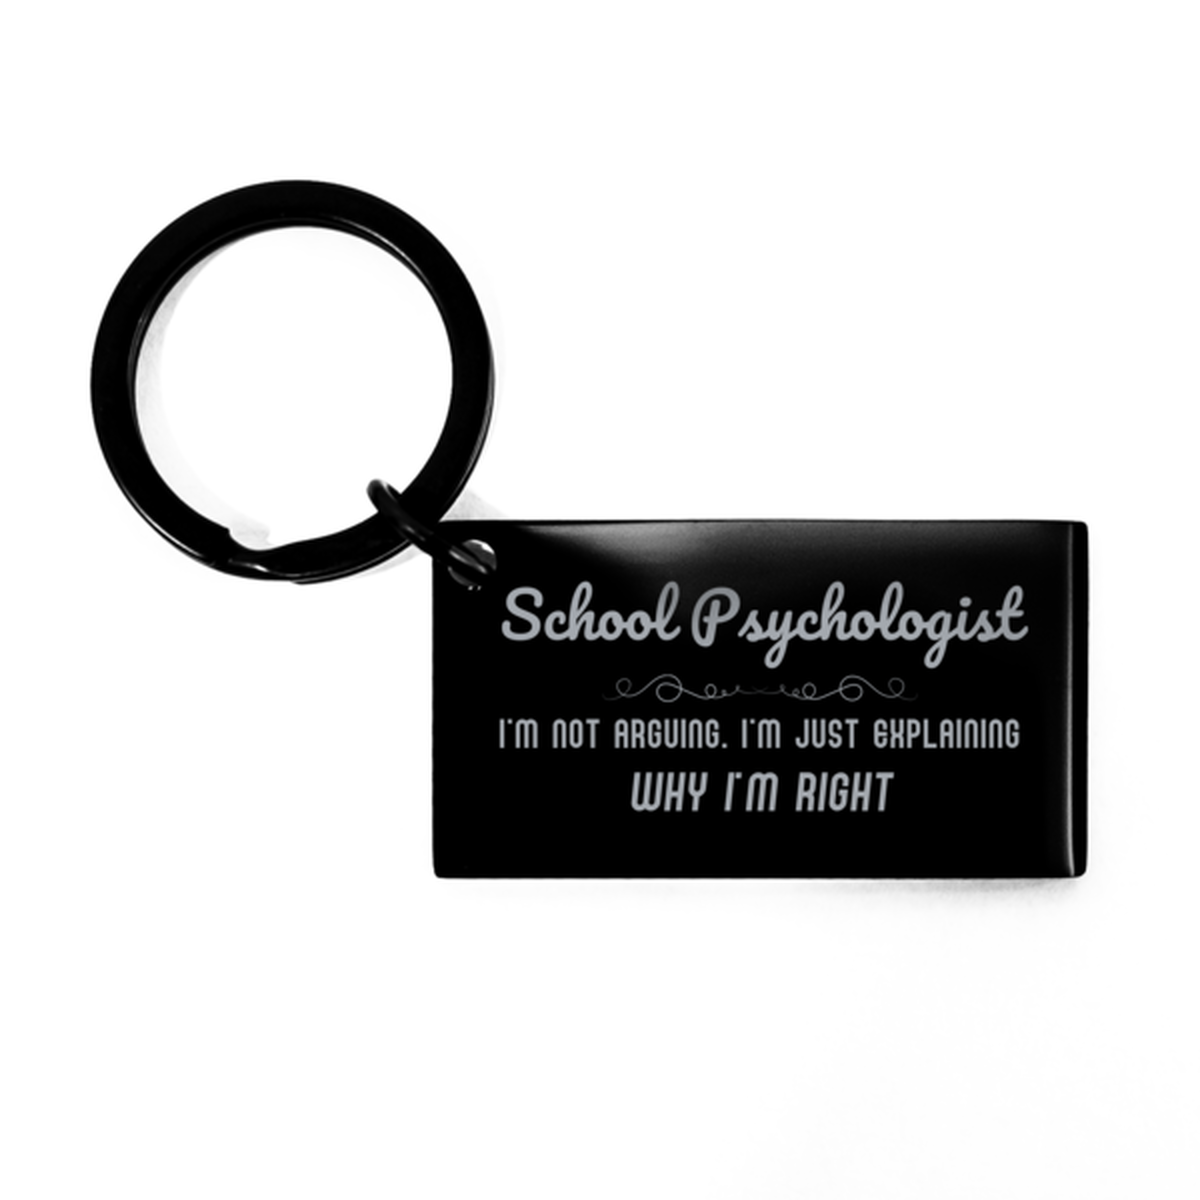 School Psychologist I'm not Arguing. I'm Just Explaining Why I'm RIGHT Keychain, Funny Saying Quote School Psychologist Gifts For School Psychologist Graduation Birthday Christmas Gifts for Men Women Coworker